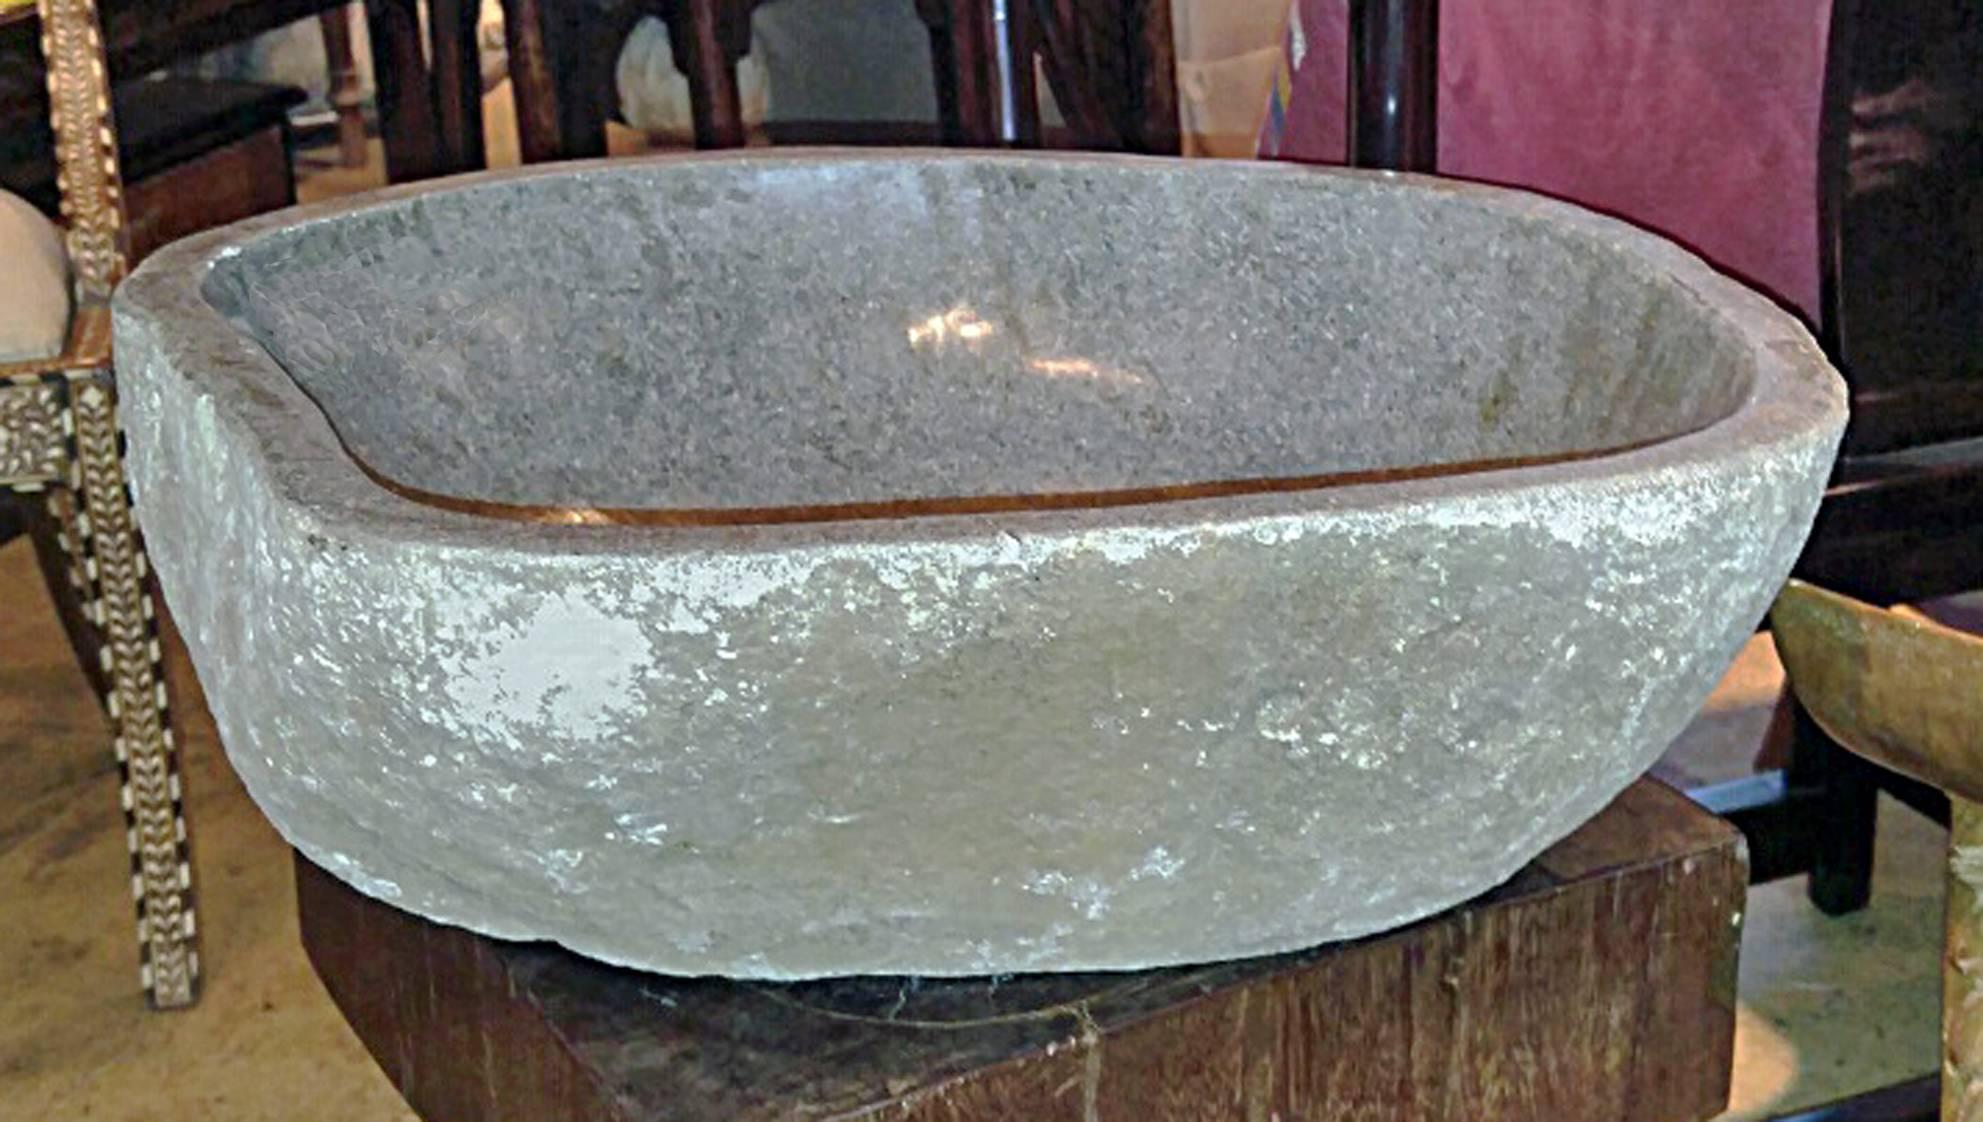 A stone bowl with a polished basin suitable for conversion as a wash basin on a stand. Can also be used as a decorative bowl or planter.